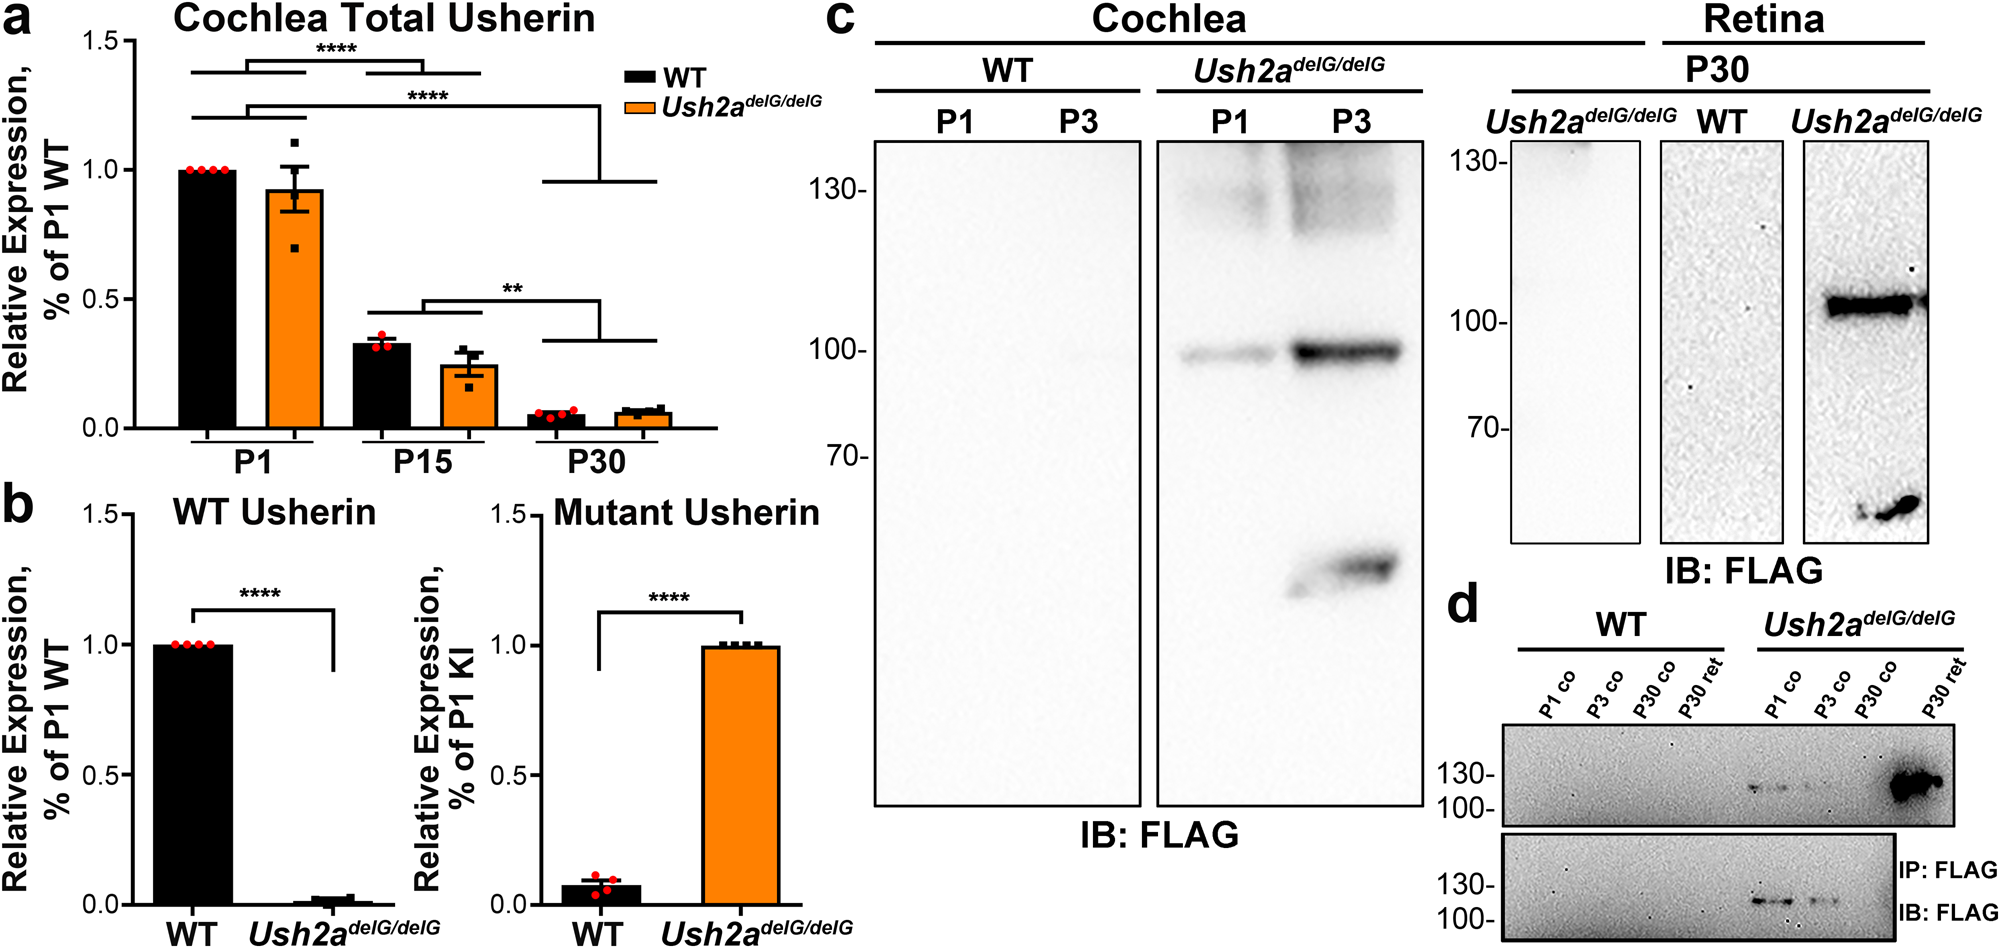 Expression of the human usherin c.2299delG mutation leads to early